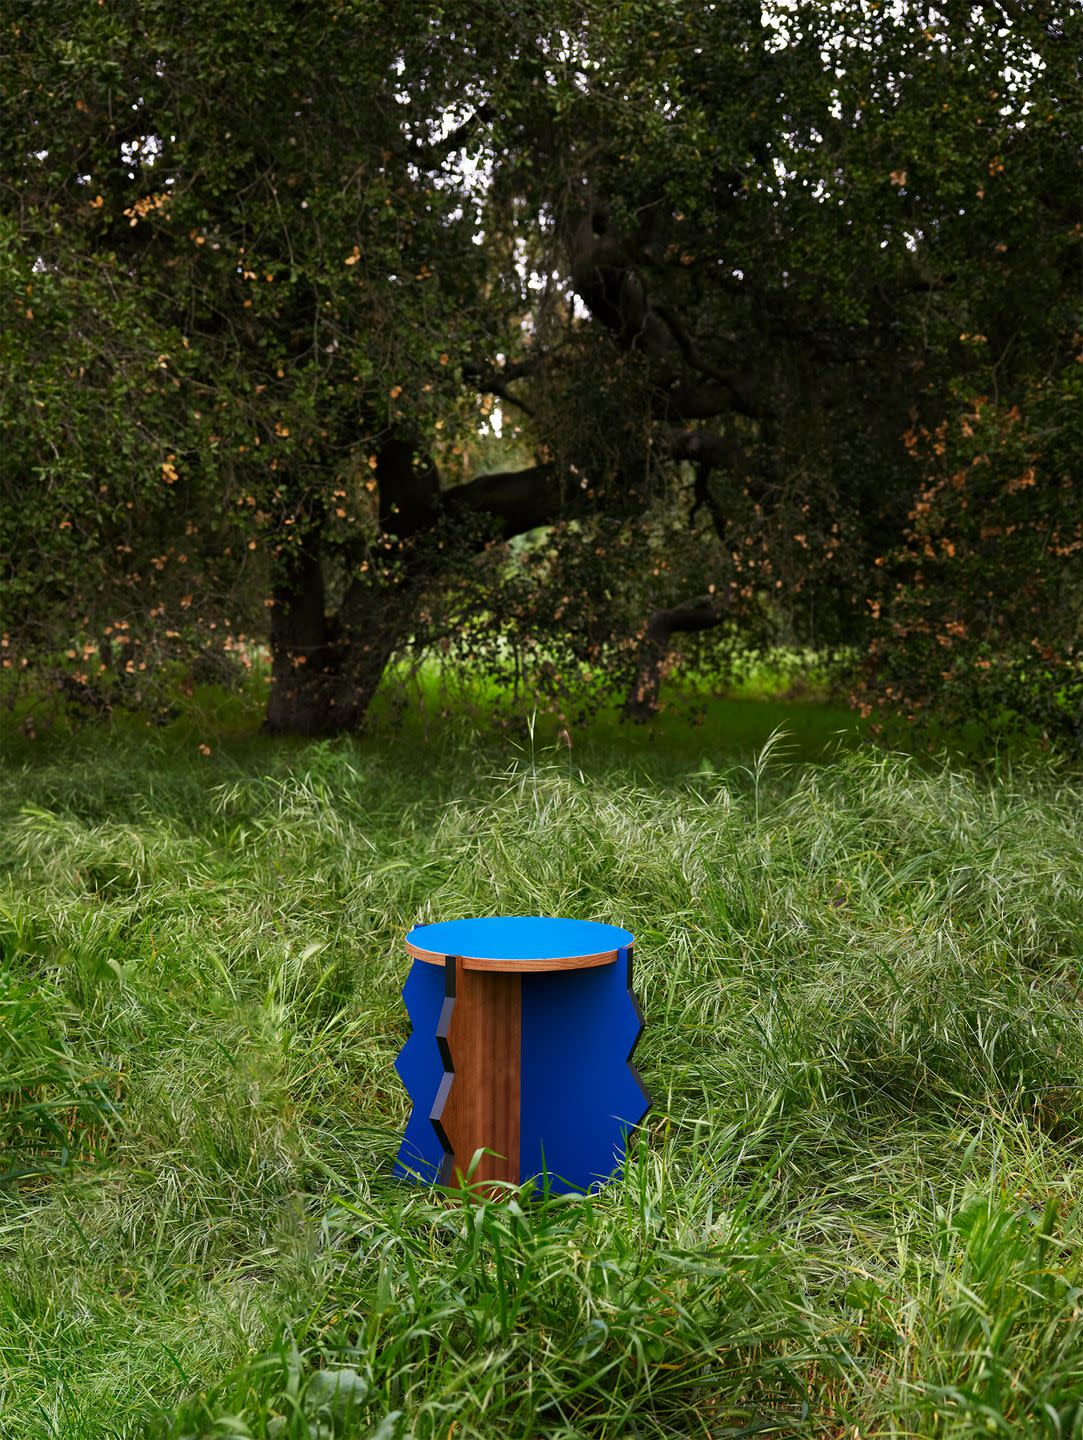 a blue stool in a grassy area